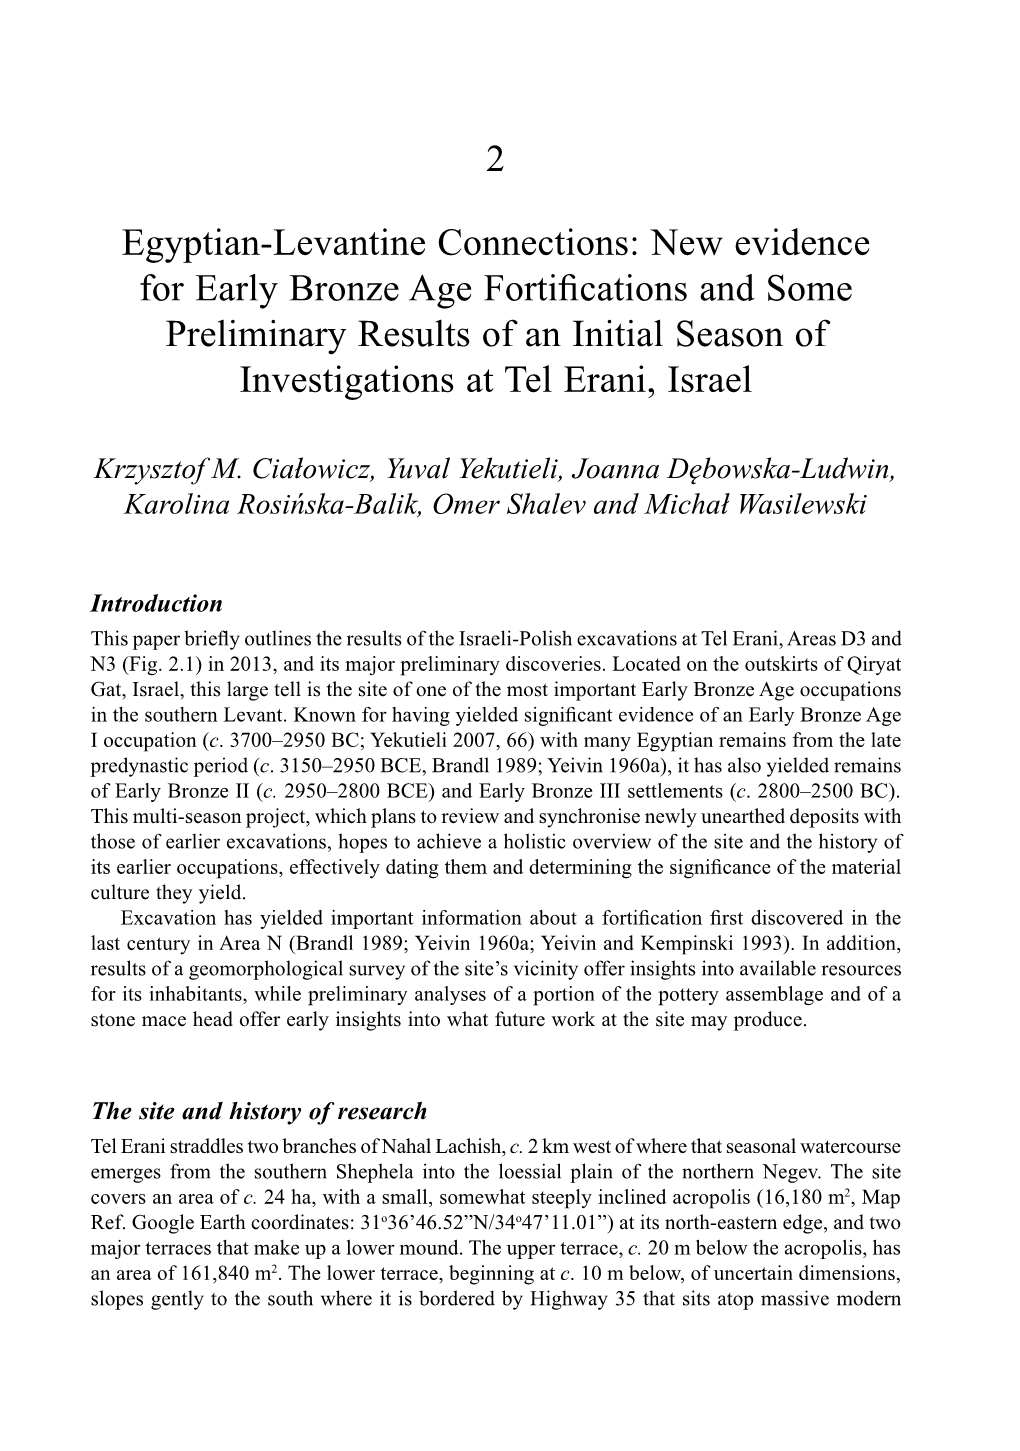 2 Egyptian-Levantine Connections: New Evidence for Early Bronze Age Fortifications and Some Preliminary Results of an Initial Se